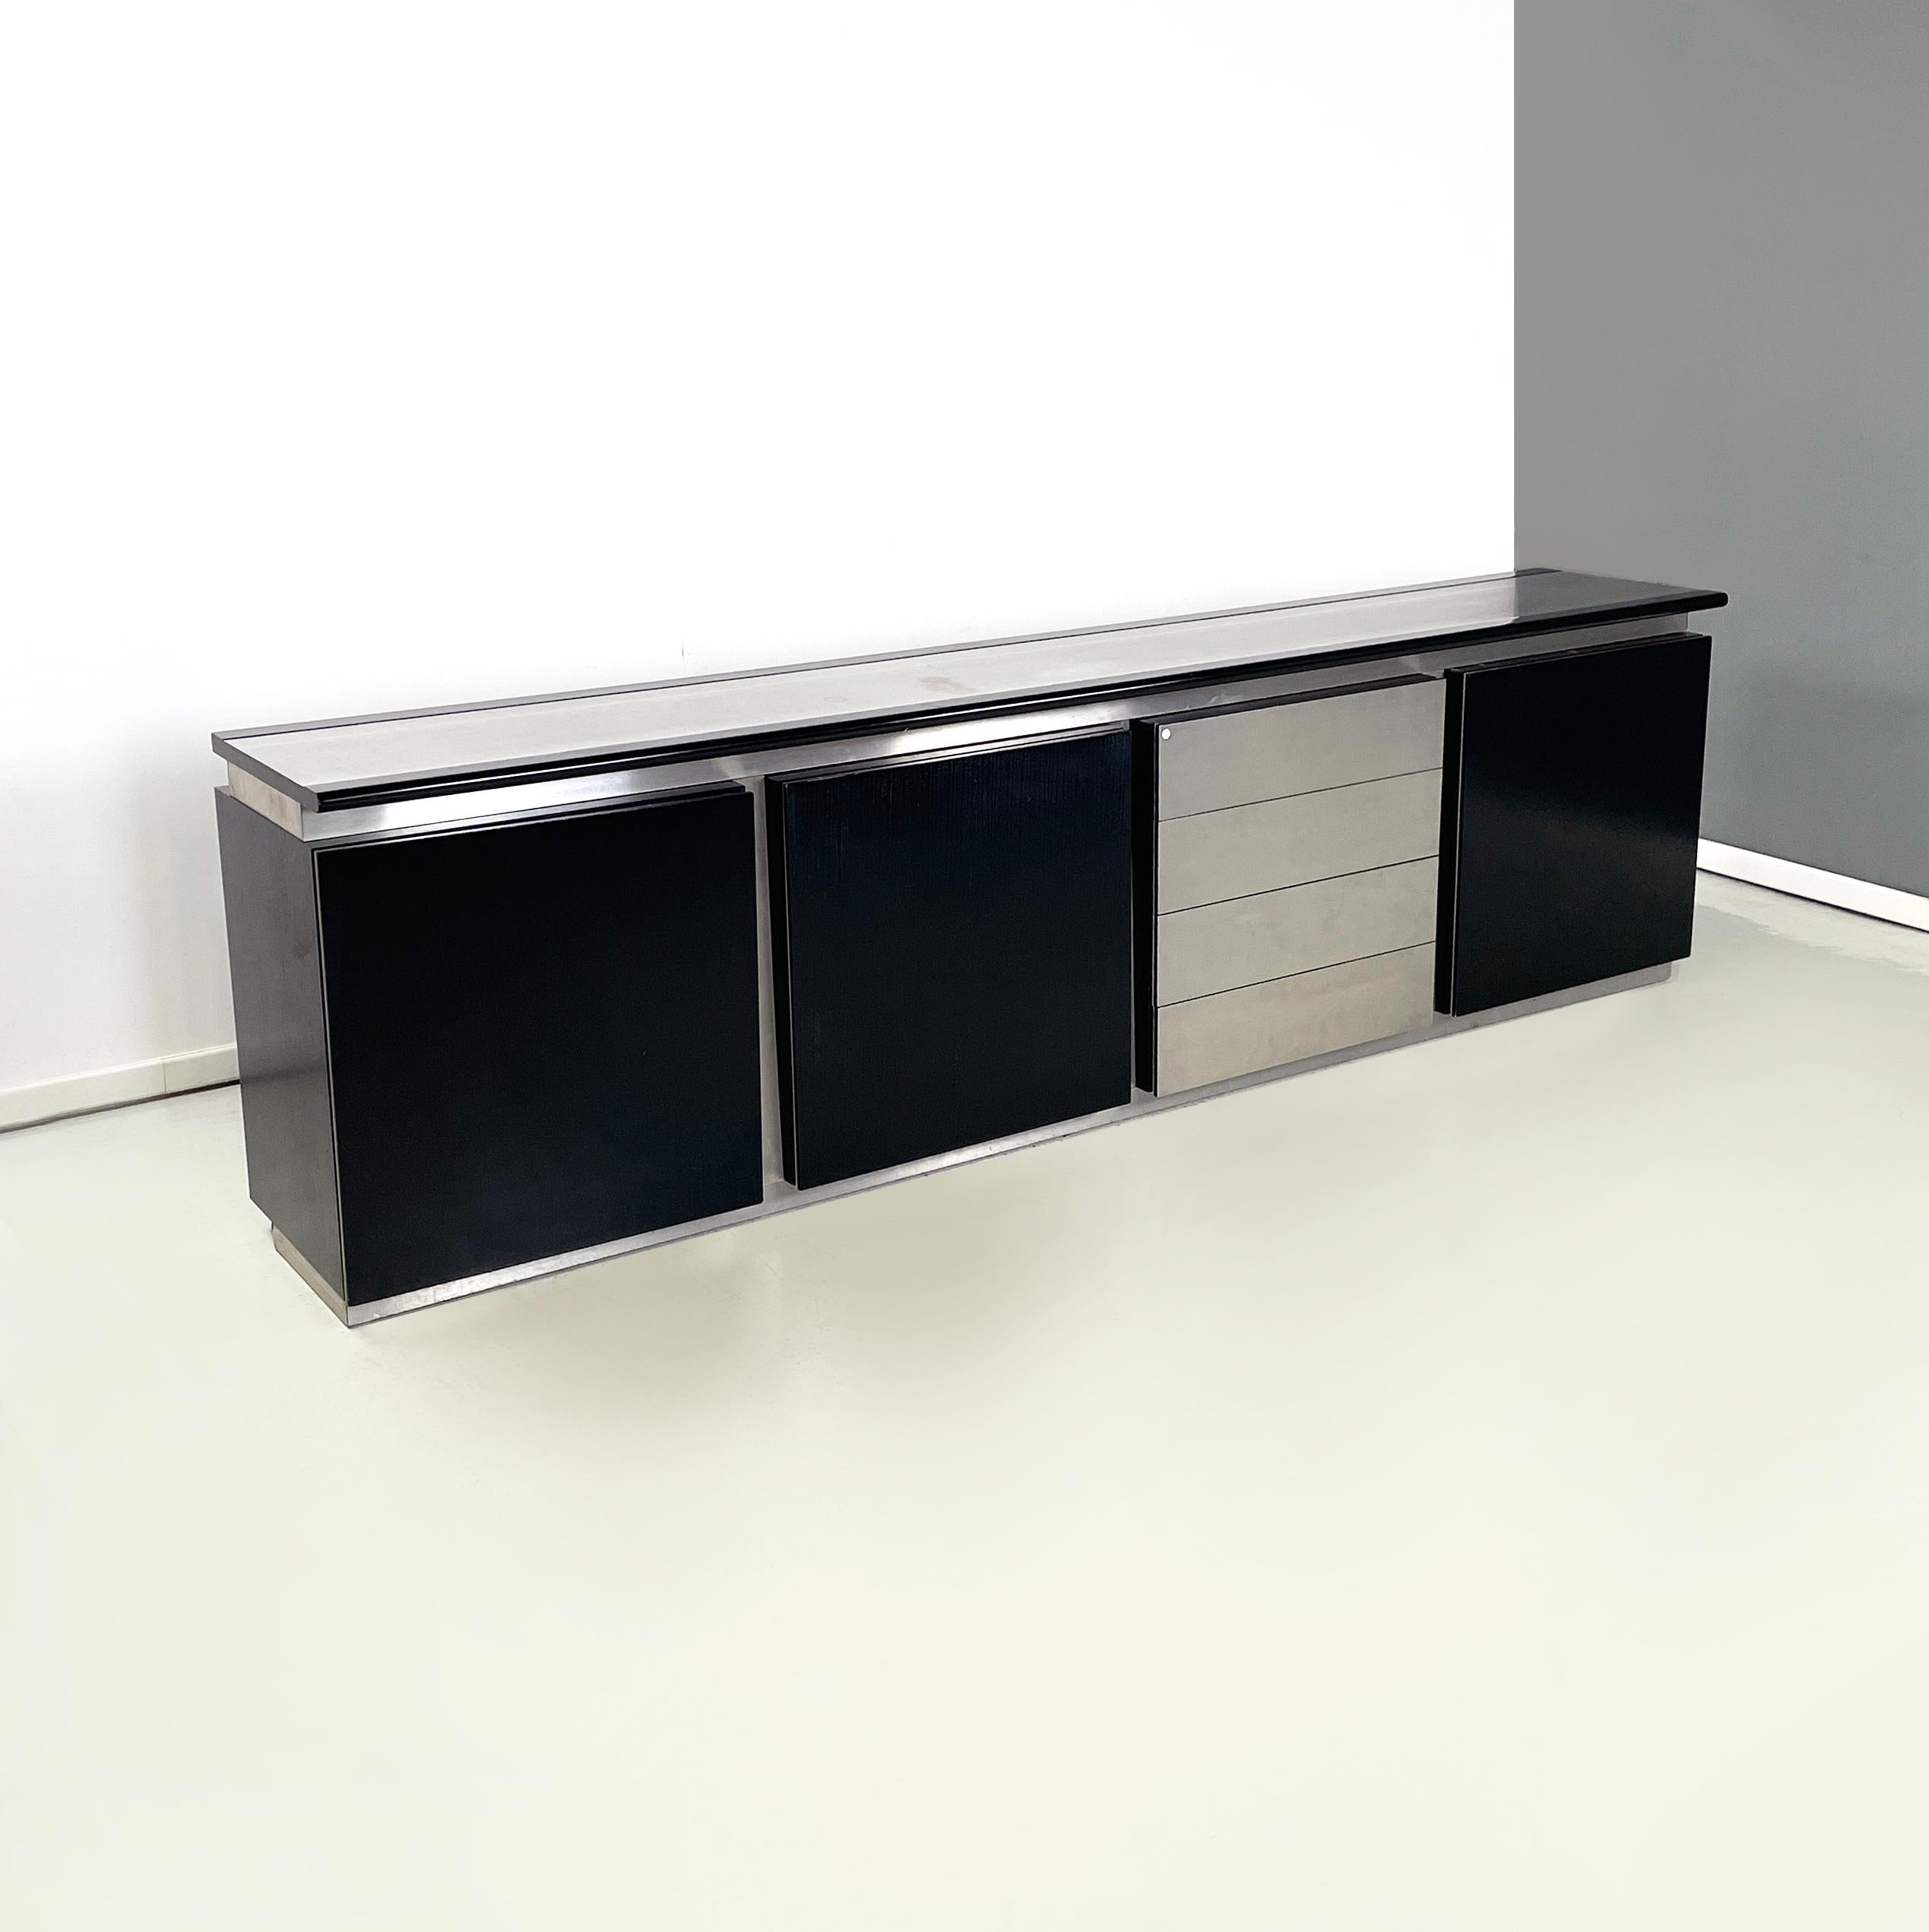 Italian modern Sideboard Parioli  by Giotto Stoppino and Marco Acerbis for Acerbis, 1980s
Sideboard mod. Parioli composed of 4 modules with solid wood structure with matt black finish and aluminum profiles. On the front it has three hinged doors and